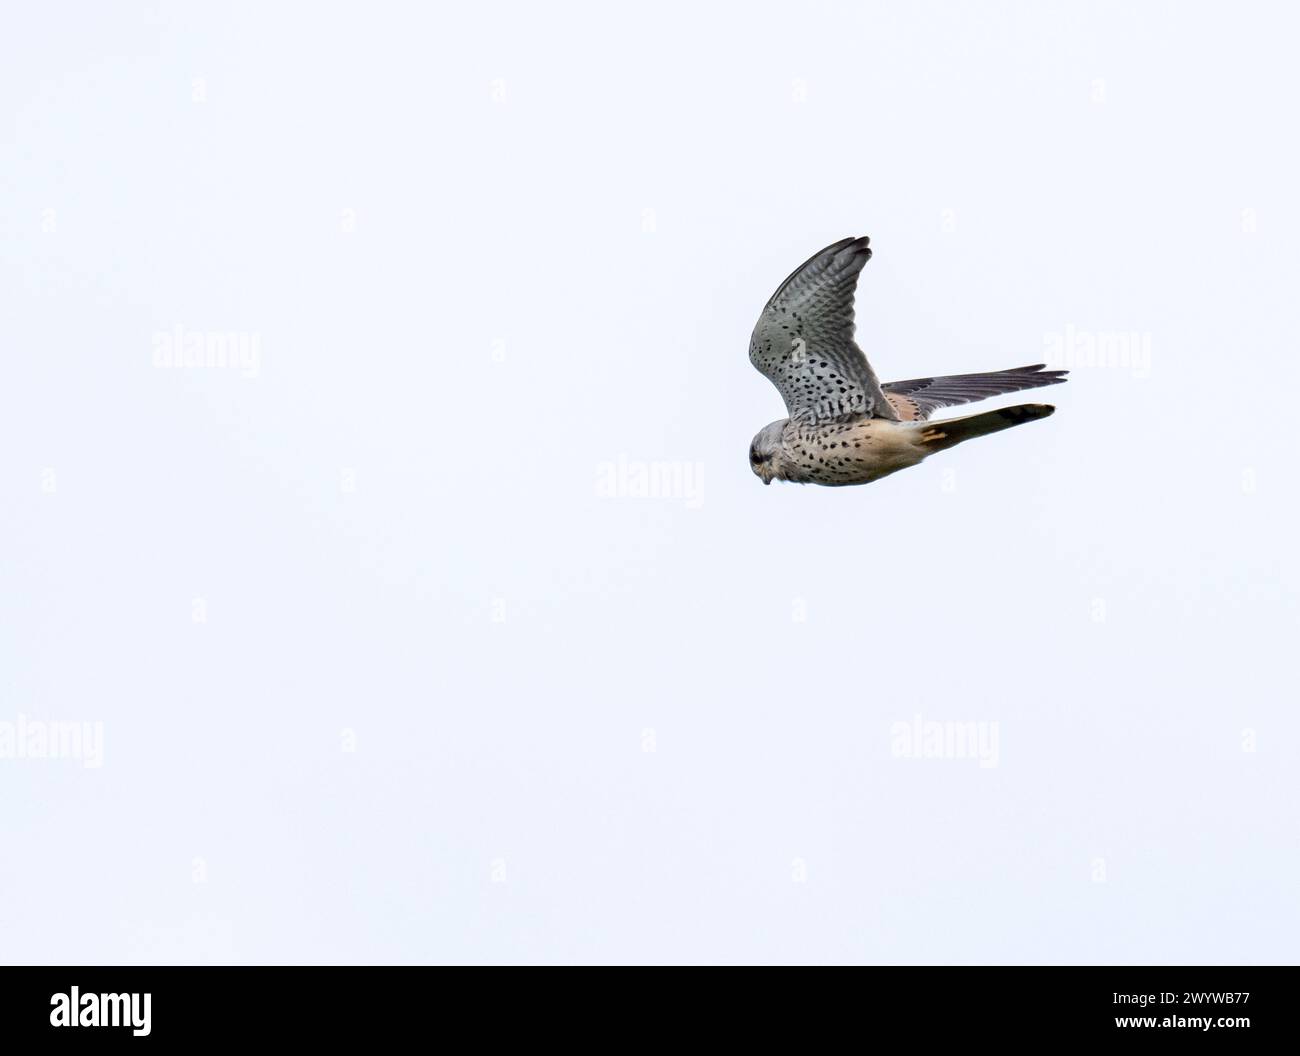 A Kestrel; Falco tinnunculus hovering in Cley Next the Sea, Norfolk, UK. Stock Photo